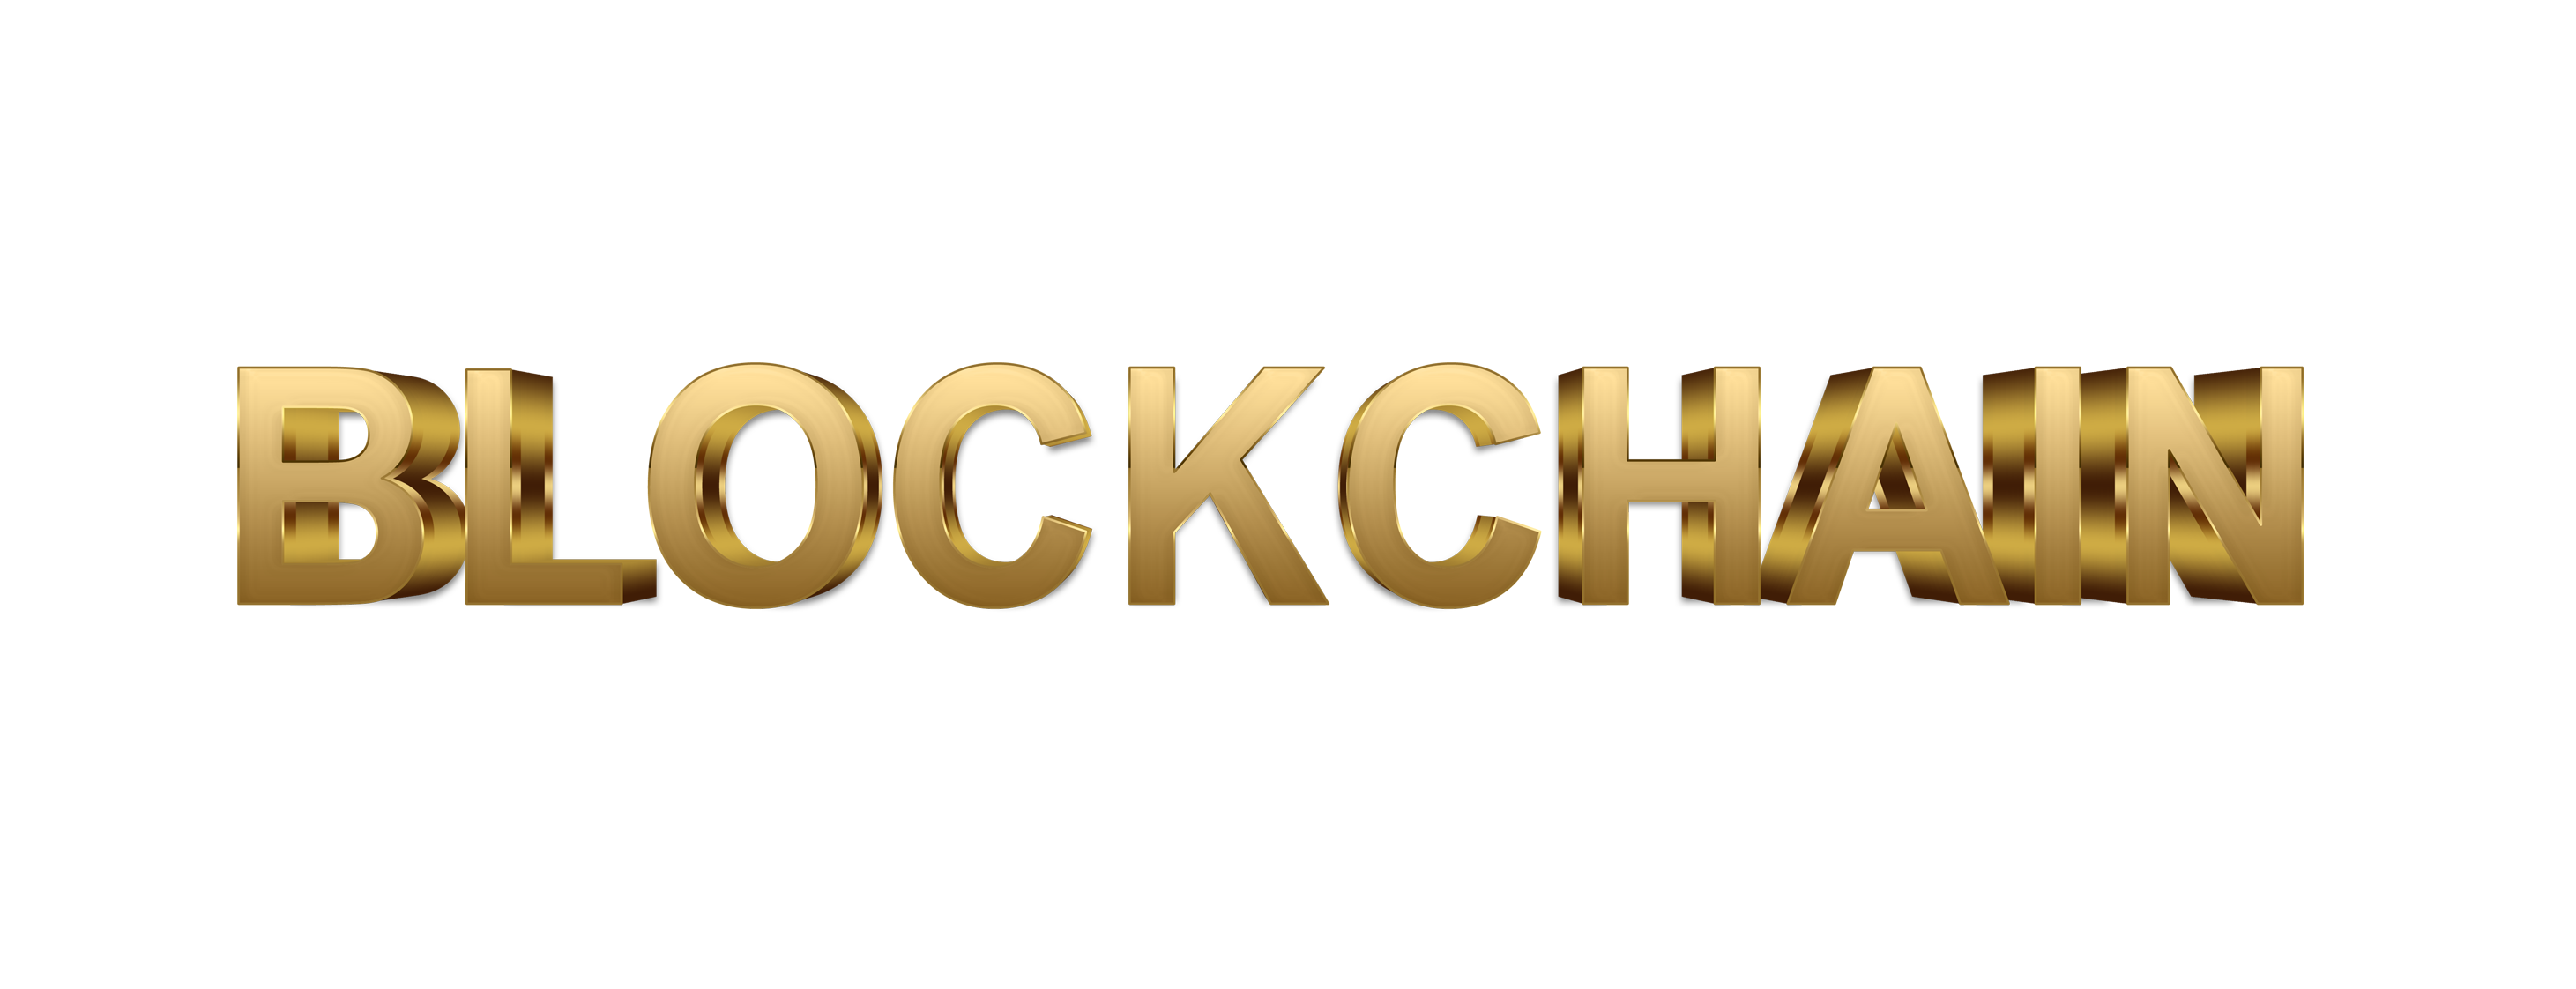 Blockchain word png, Blockchain png, word Blockchain gold text typography PNG images Blockchain